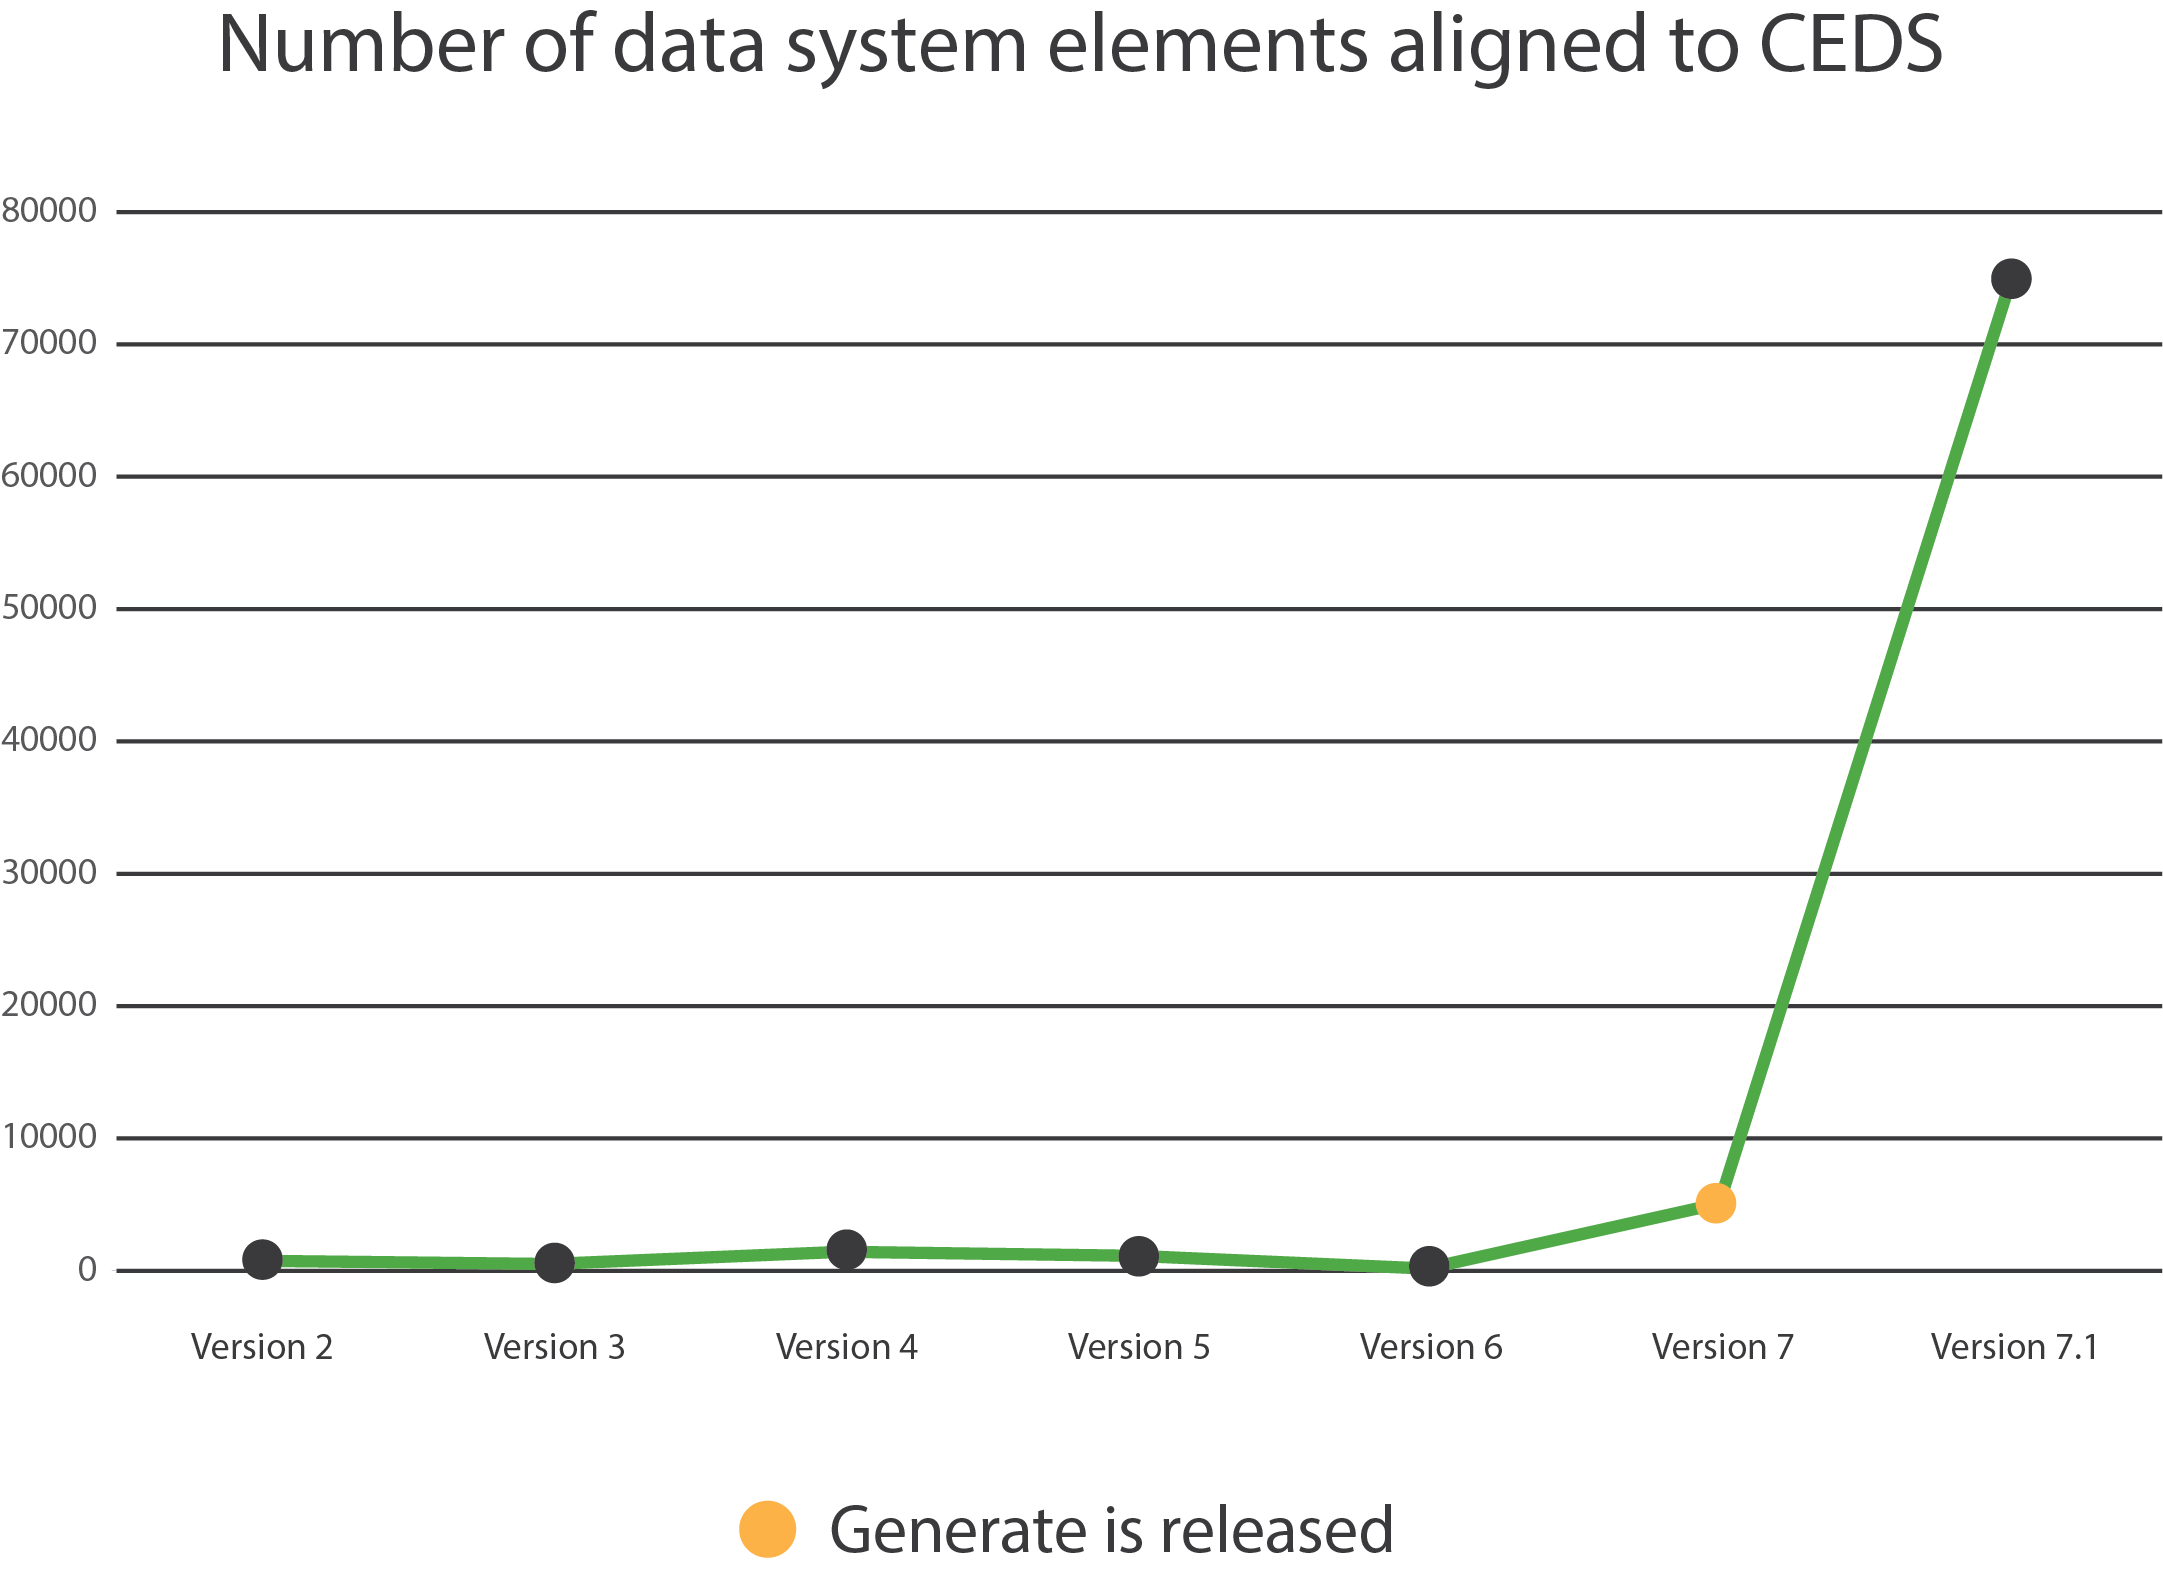 Data elements aligned to CEDS